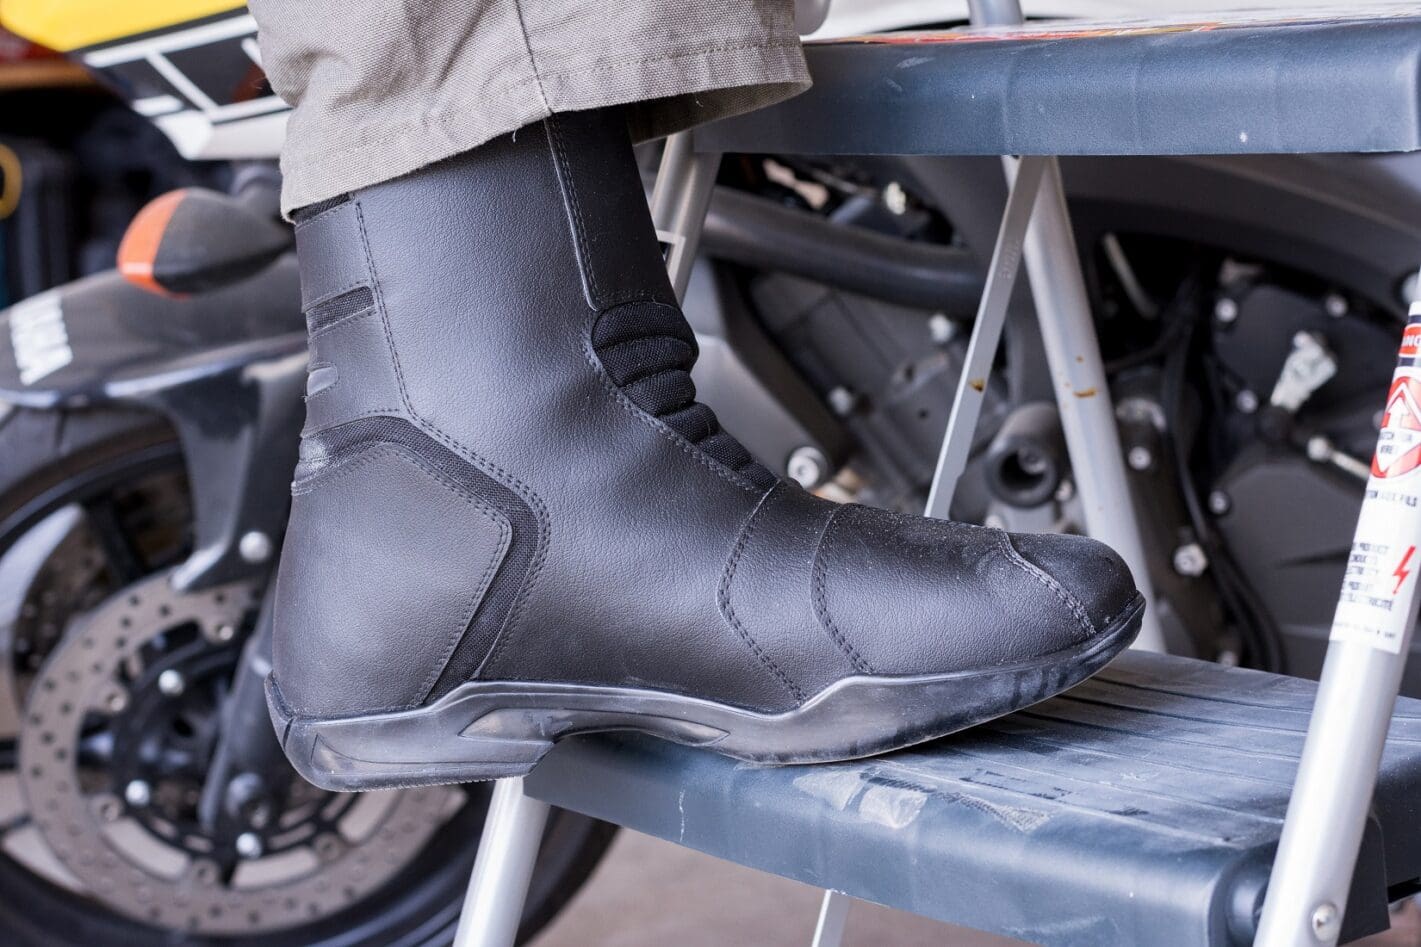 Motorcycle Boots Buyer's Guide | webBikeWorld